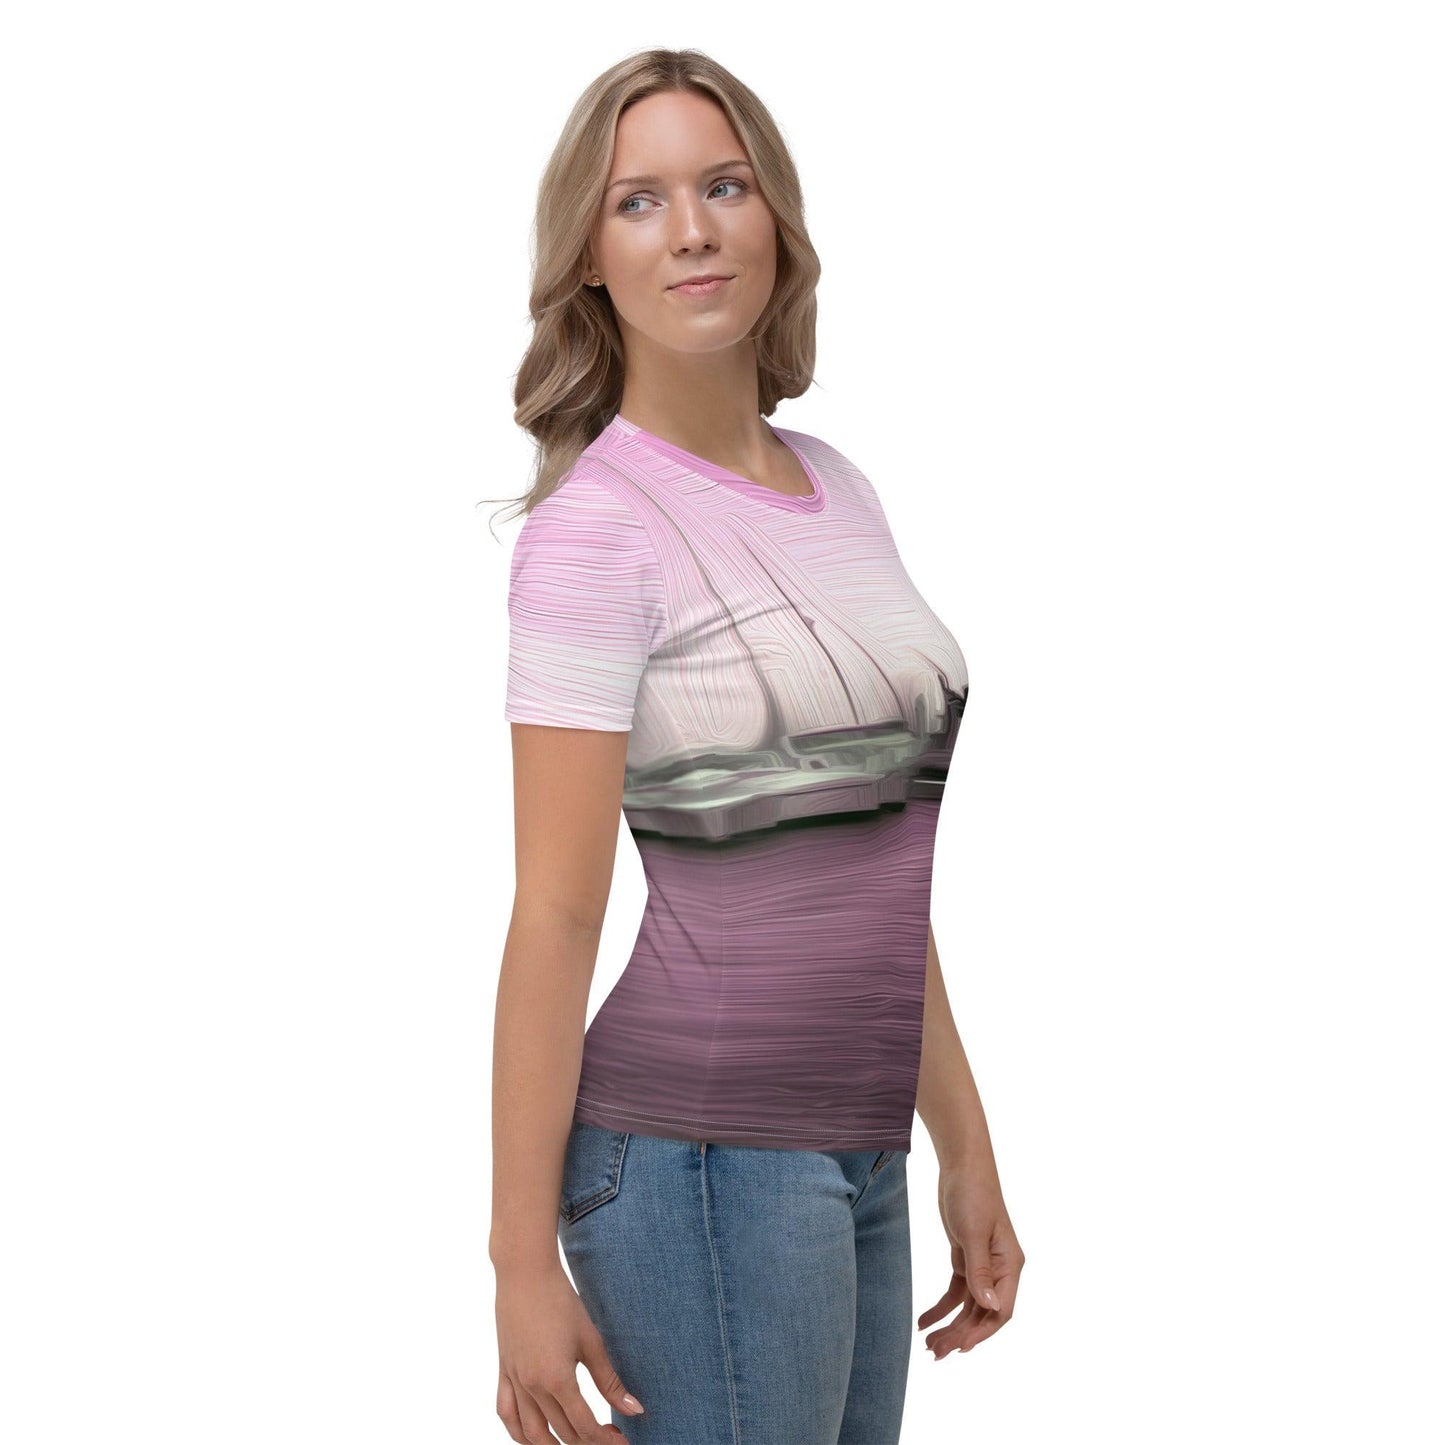 The Sleeping Yachts (at Evening) - Womens T-Shirt - iSAW Company